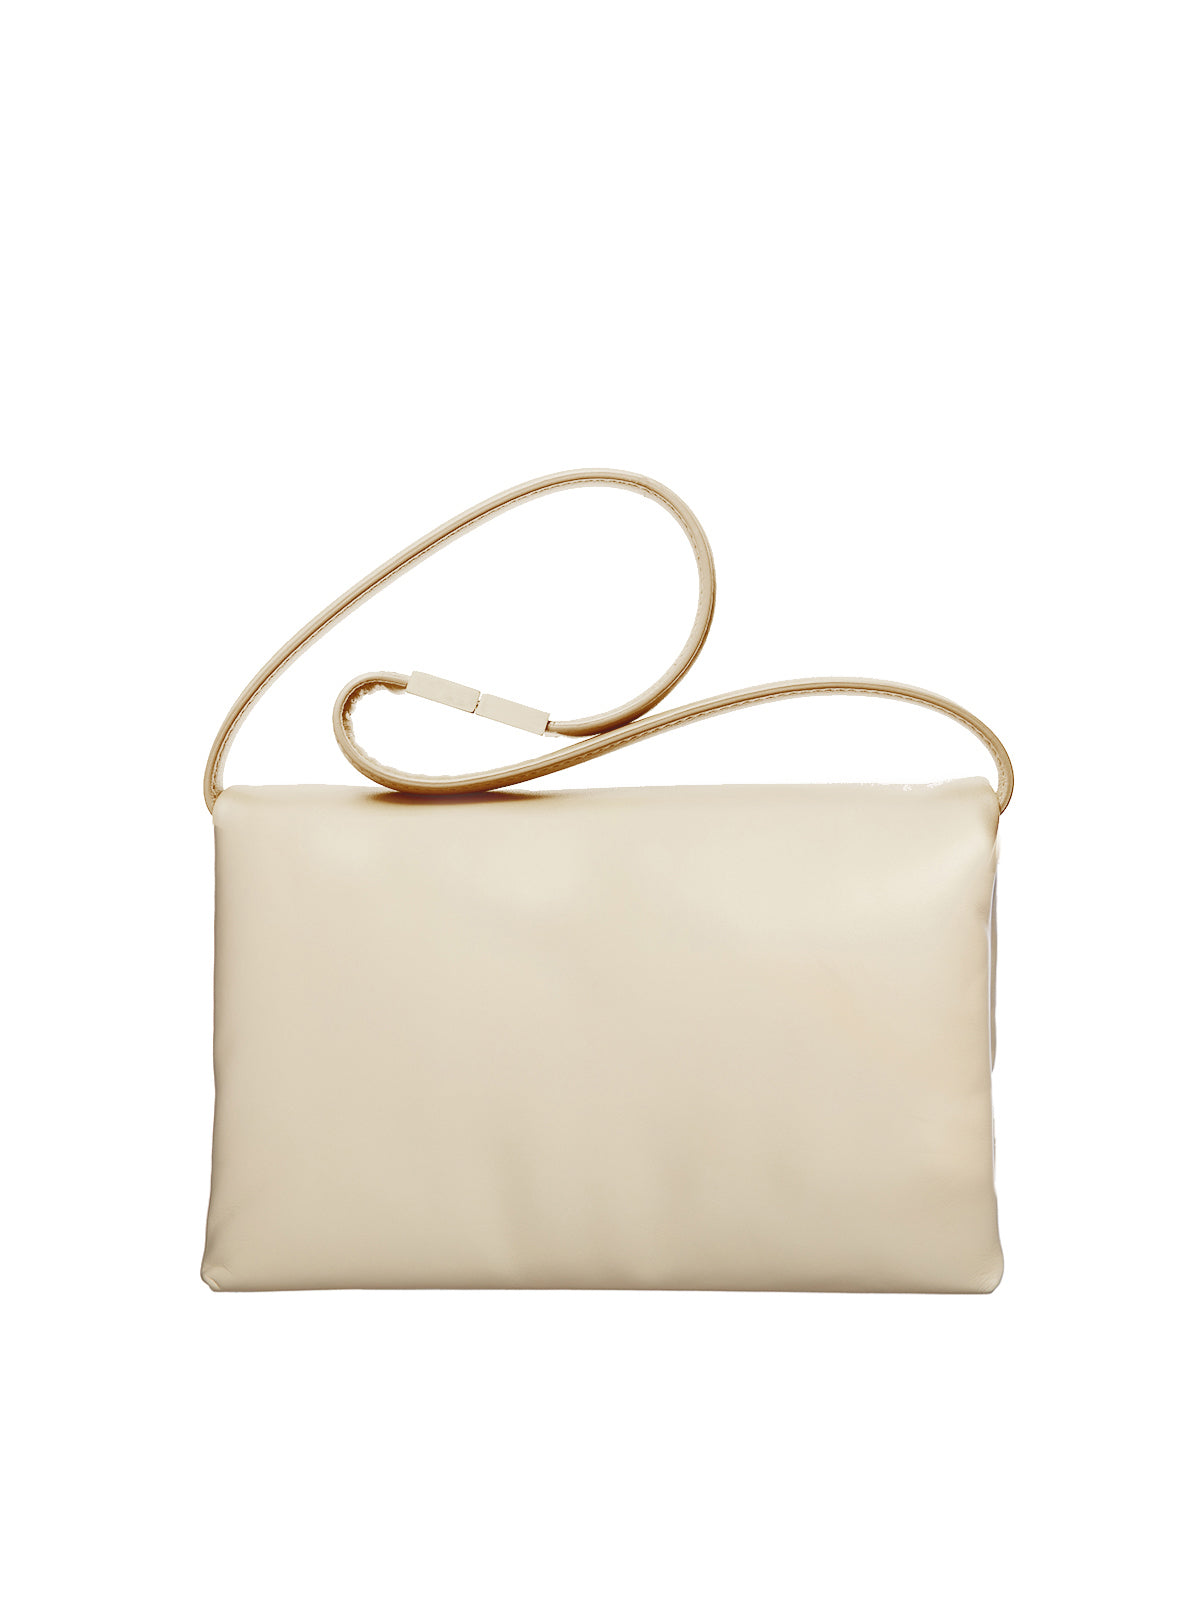 Favorite Shoulder and Crossbody Bag in Cream Leather